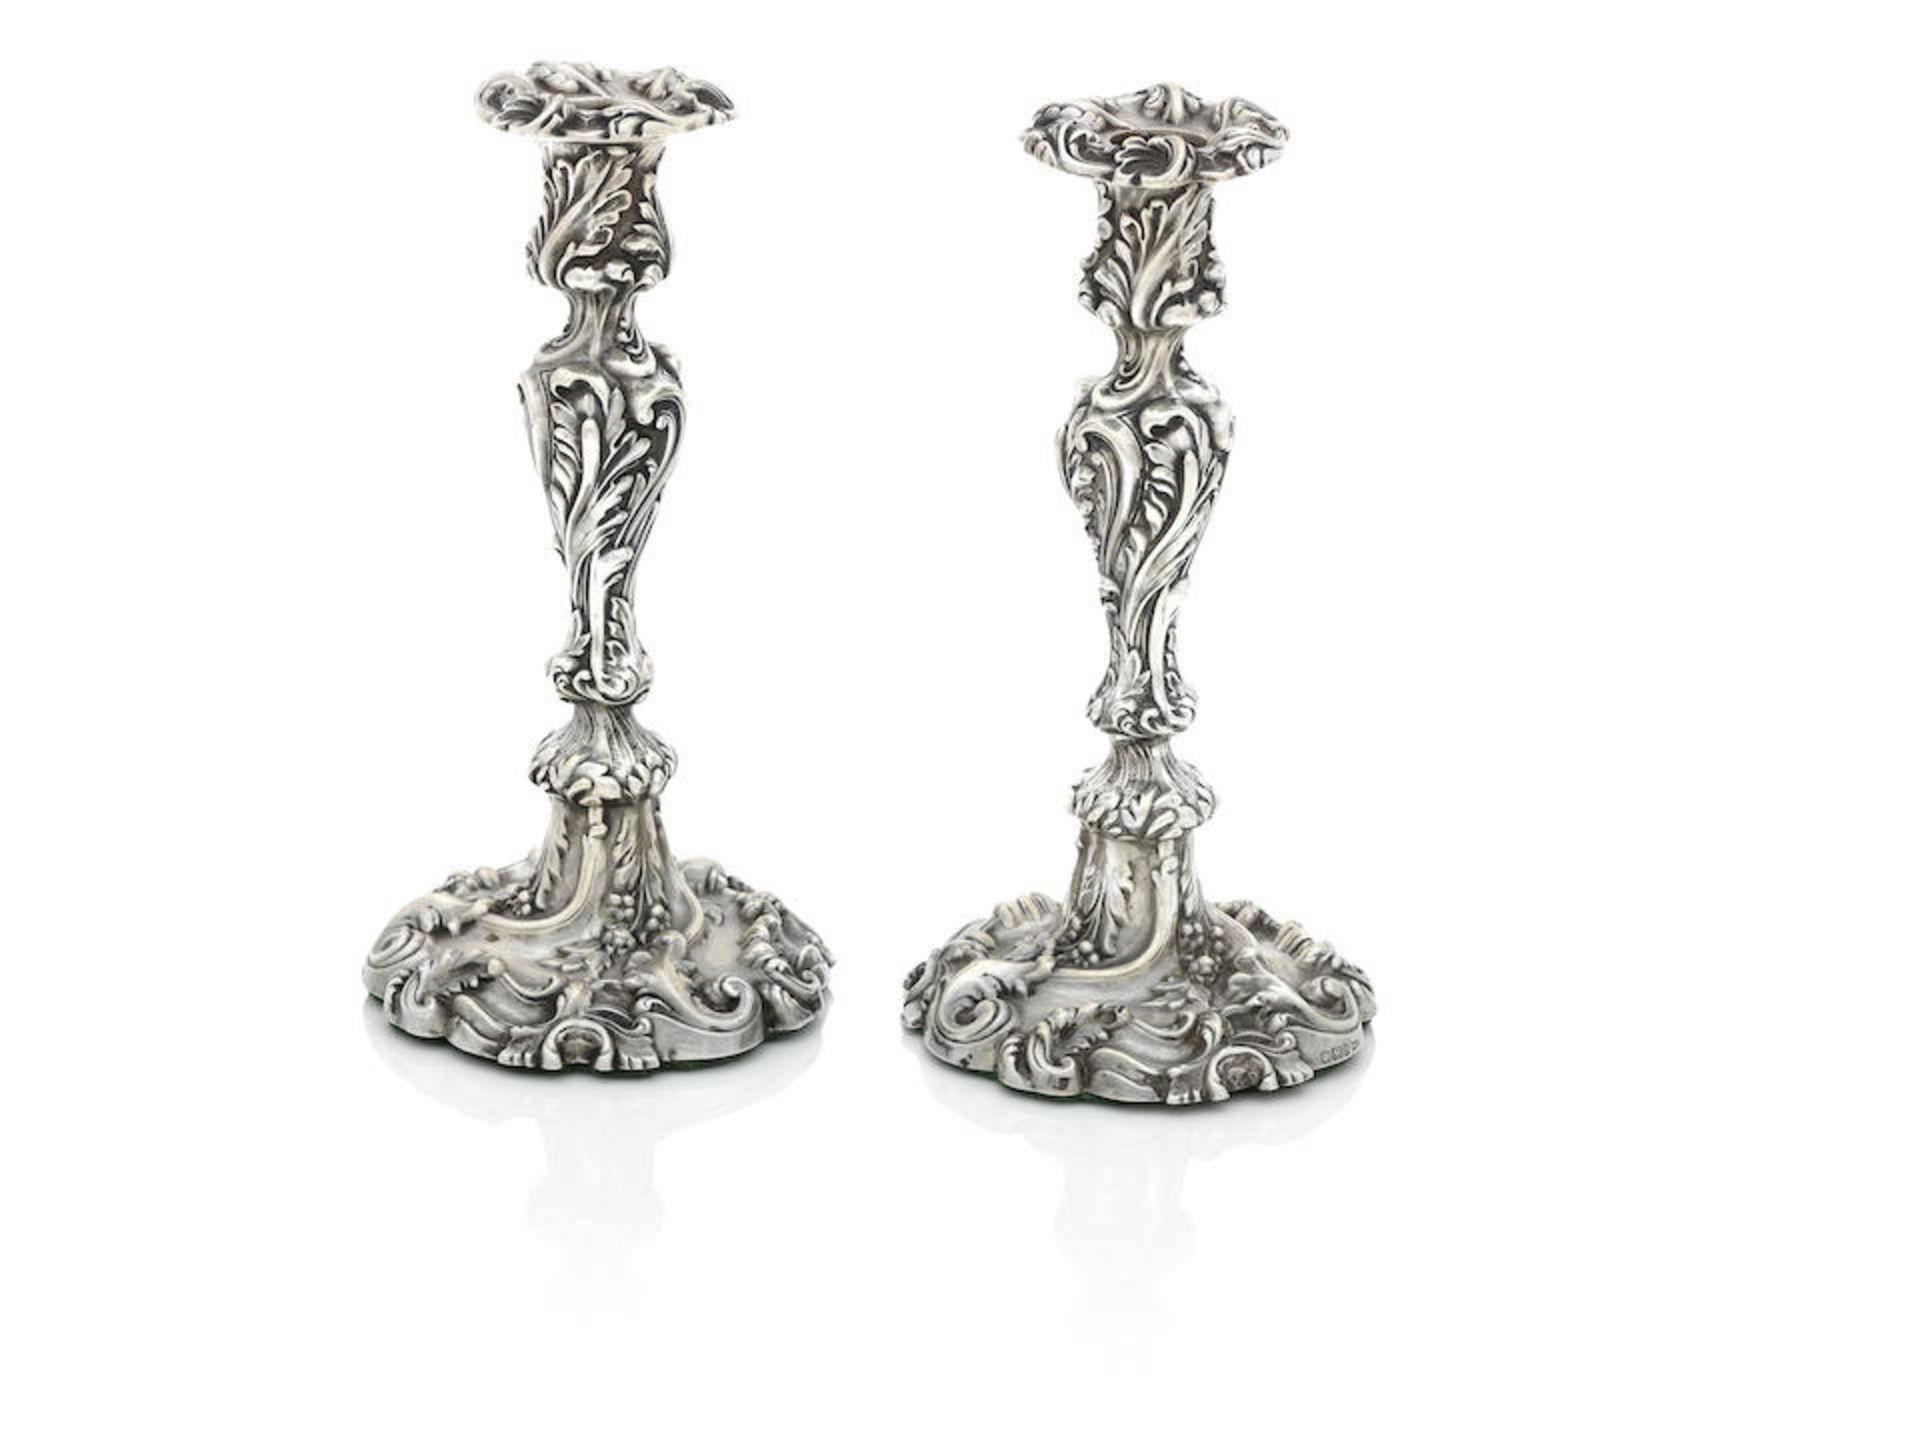 A Pair of Late Victorian Rococo Style Candlesticks Walker and Hall, Sheffield 1899 (2)